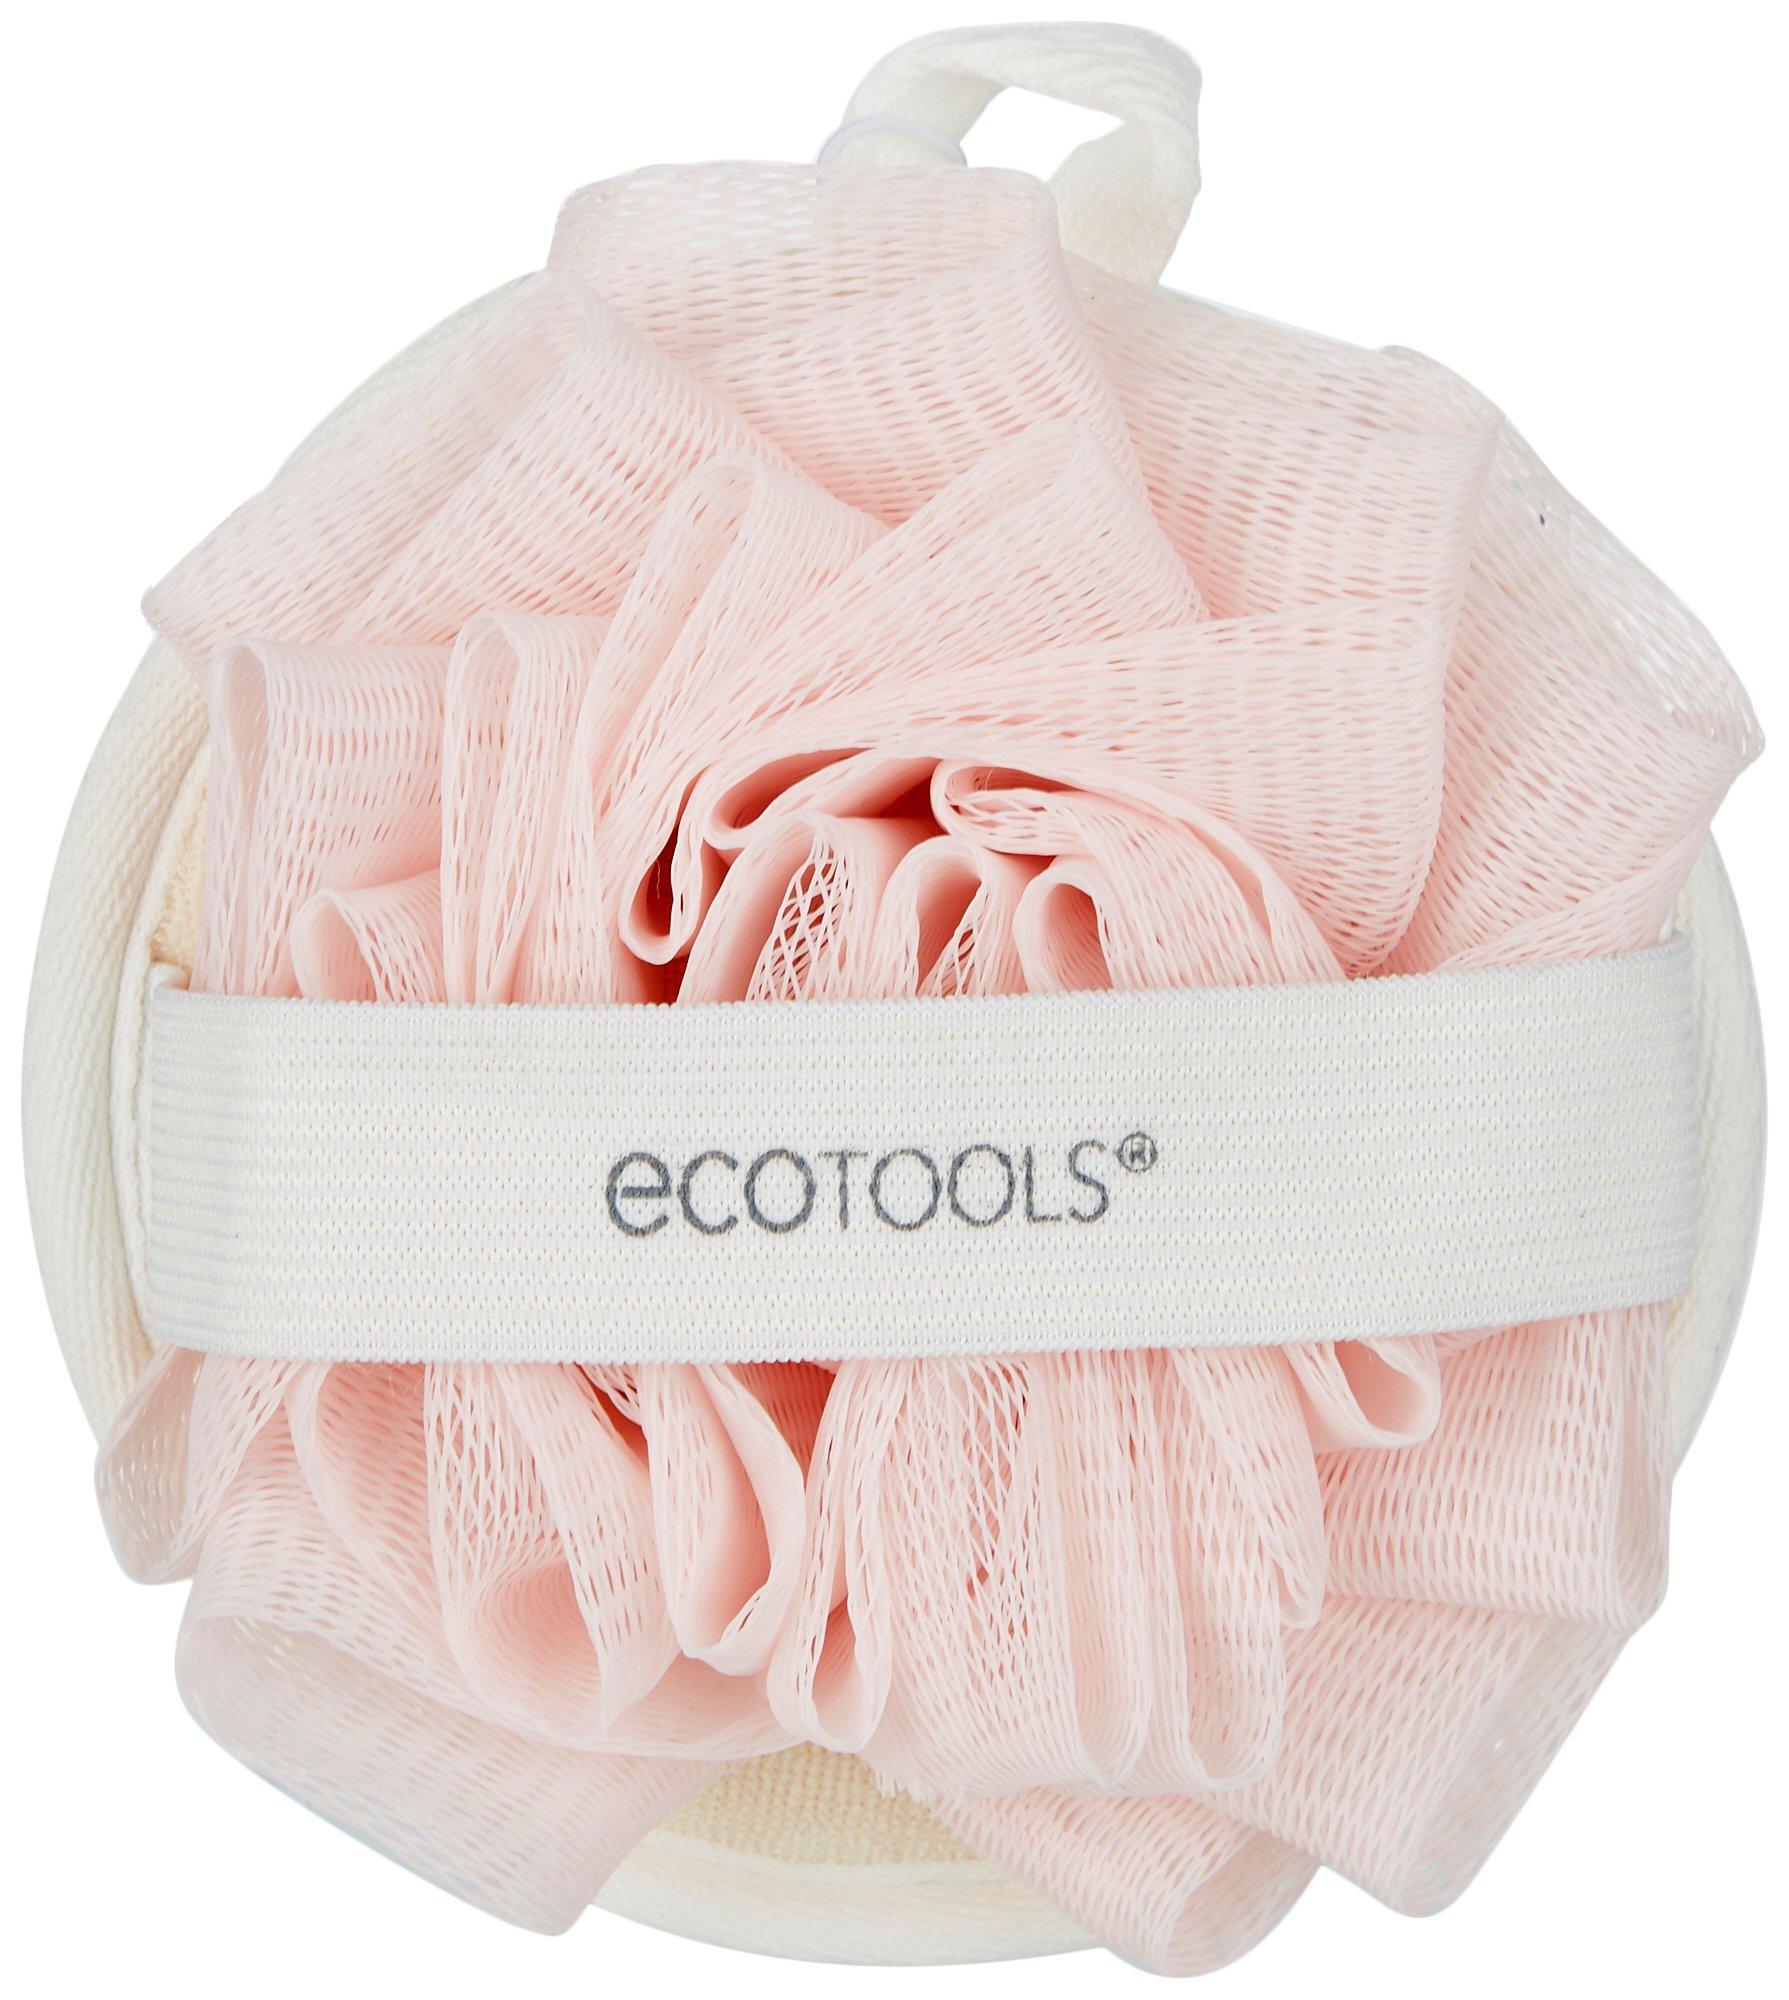 Ecotools Ecopouf Dual Cleansing Pad